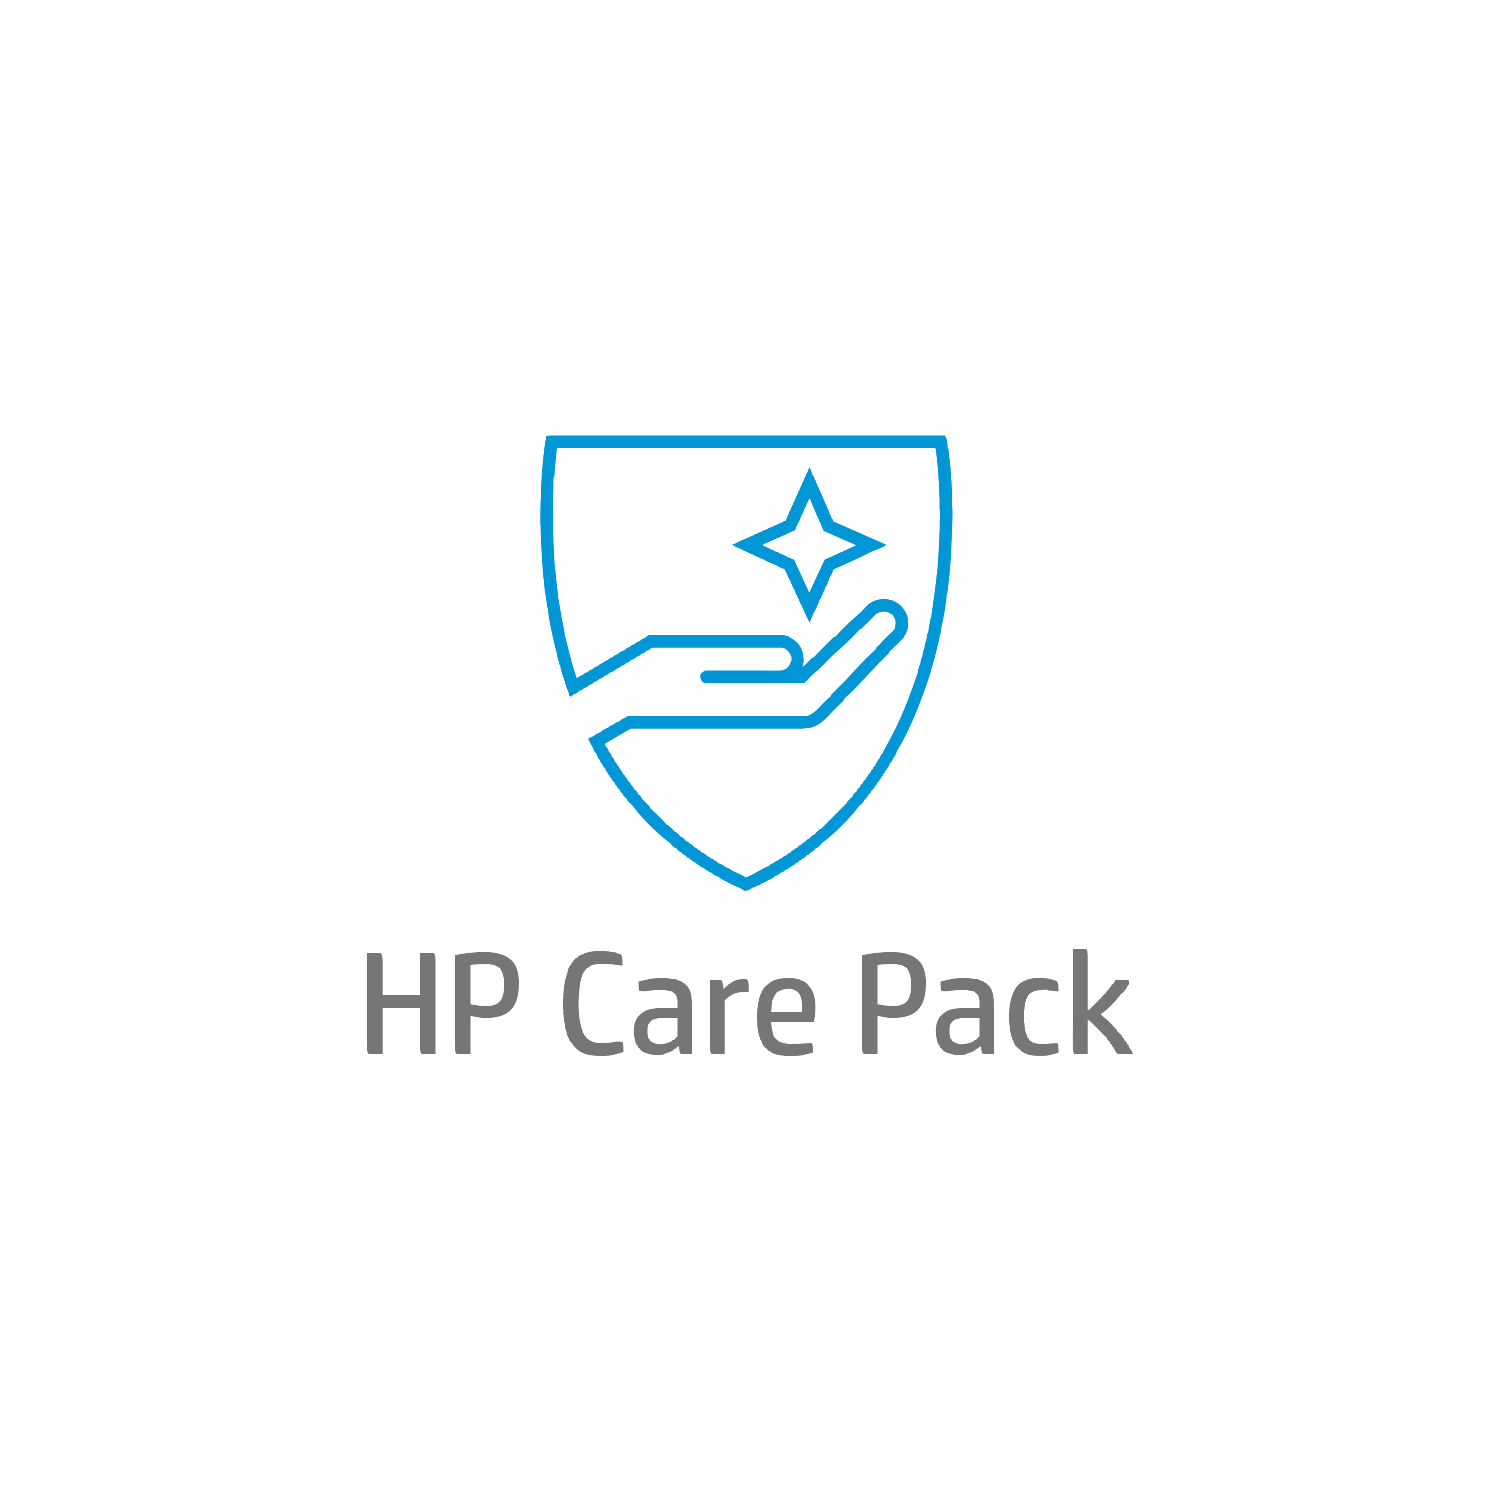 Bild von HP 1y 9x5 HPScan Pro 10,000+ Lic SW Support REQUIRED for each software license purchased. - Remote software assistance - Remote - In warranty - Standard workdays - 9 hours - 1 year - Next available agent